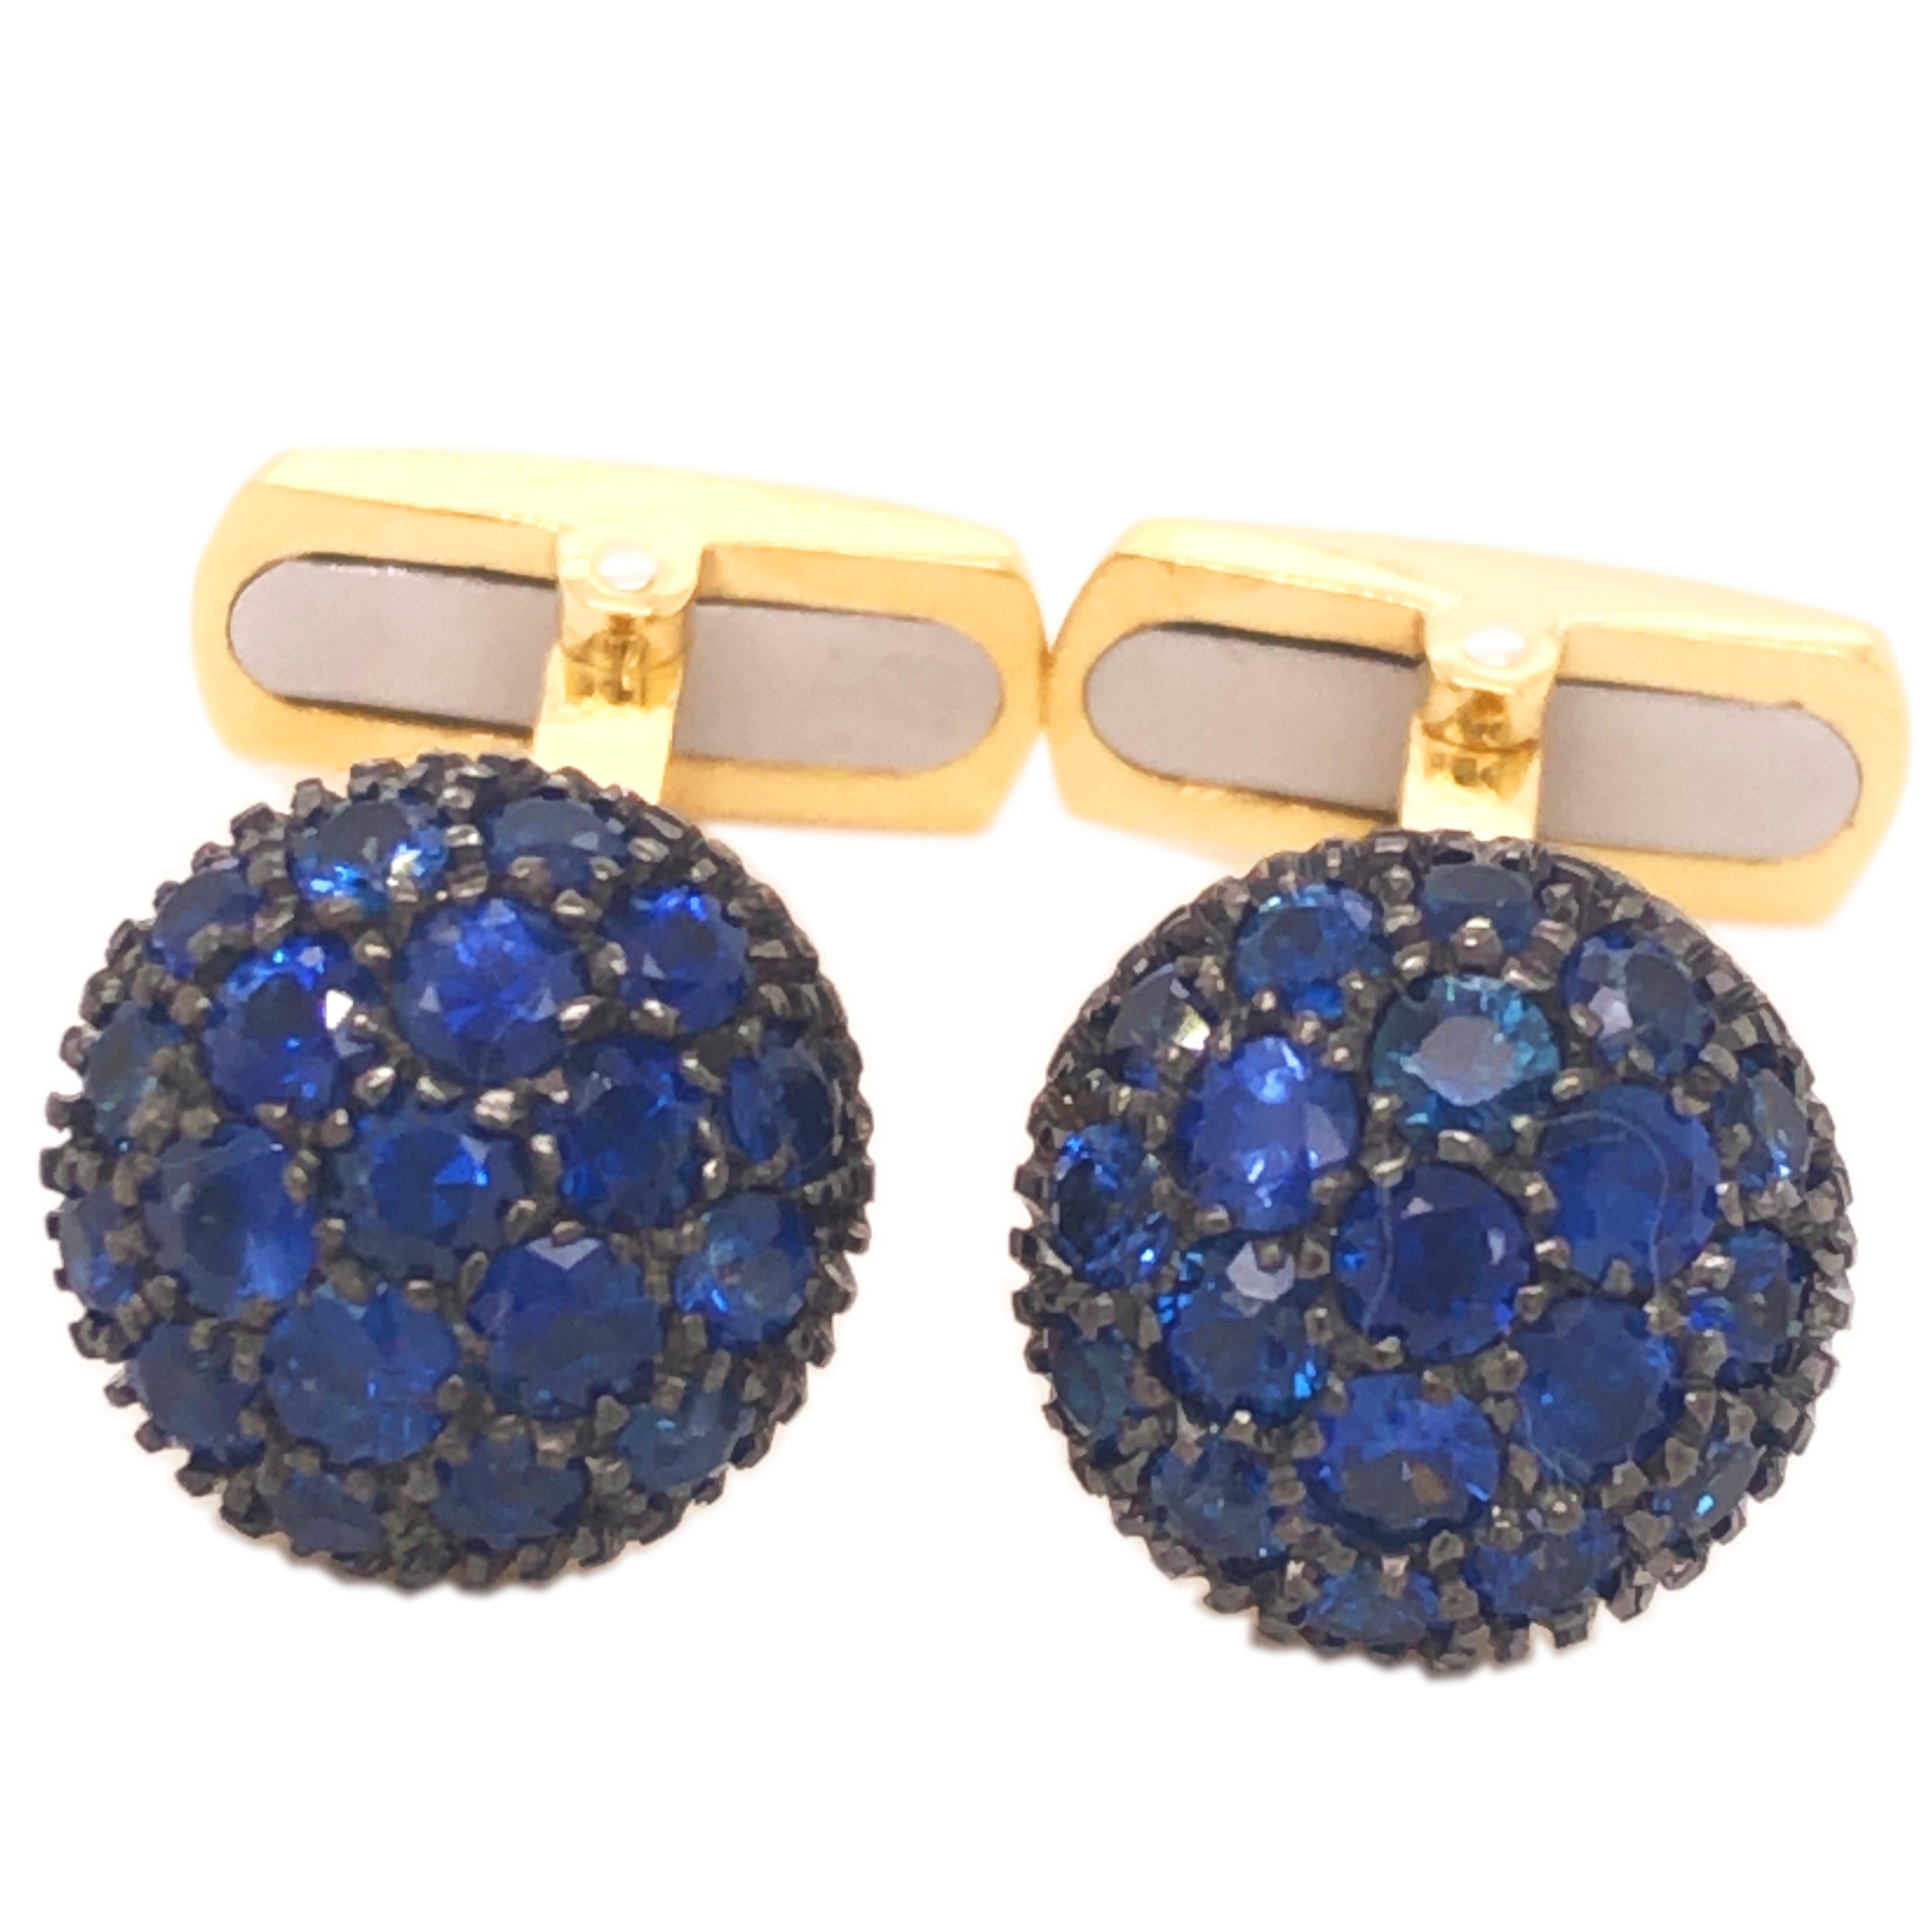 Absolutely Chic, Smart yet Timeless 2.31 Carat Natural Round Blue Brilliant Cut Sapphire in a 0.30 OzT 18Kt Oxidized Black and Yellow Gold Round Cabochon Setting, 
In our gift wrapped fitted tobacco leather case and pouch.
A detailed expertise is